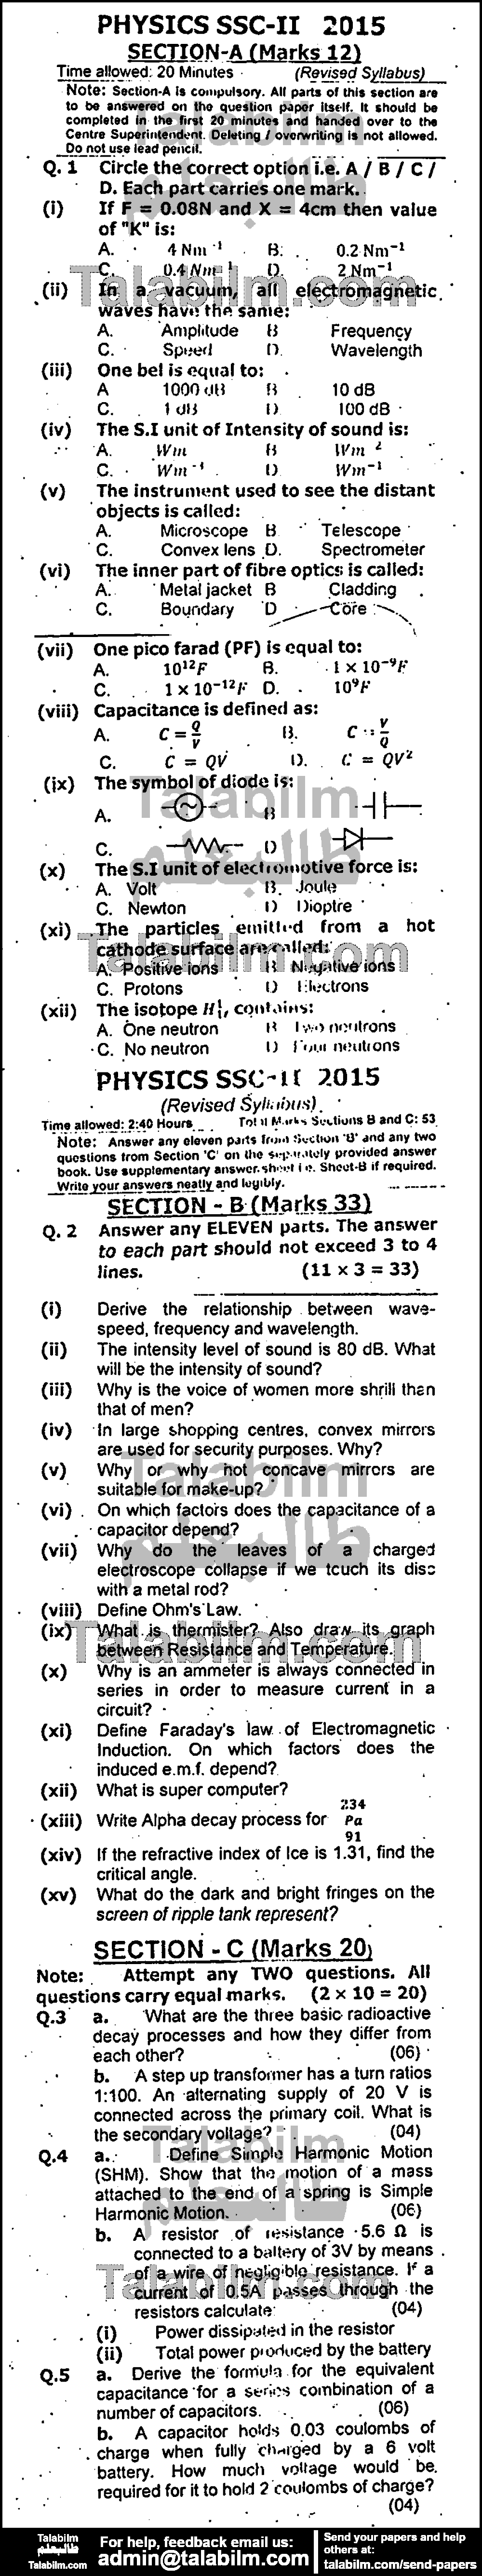 Physics 0 past paper for 2015 Group-I